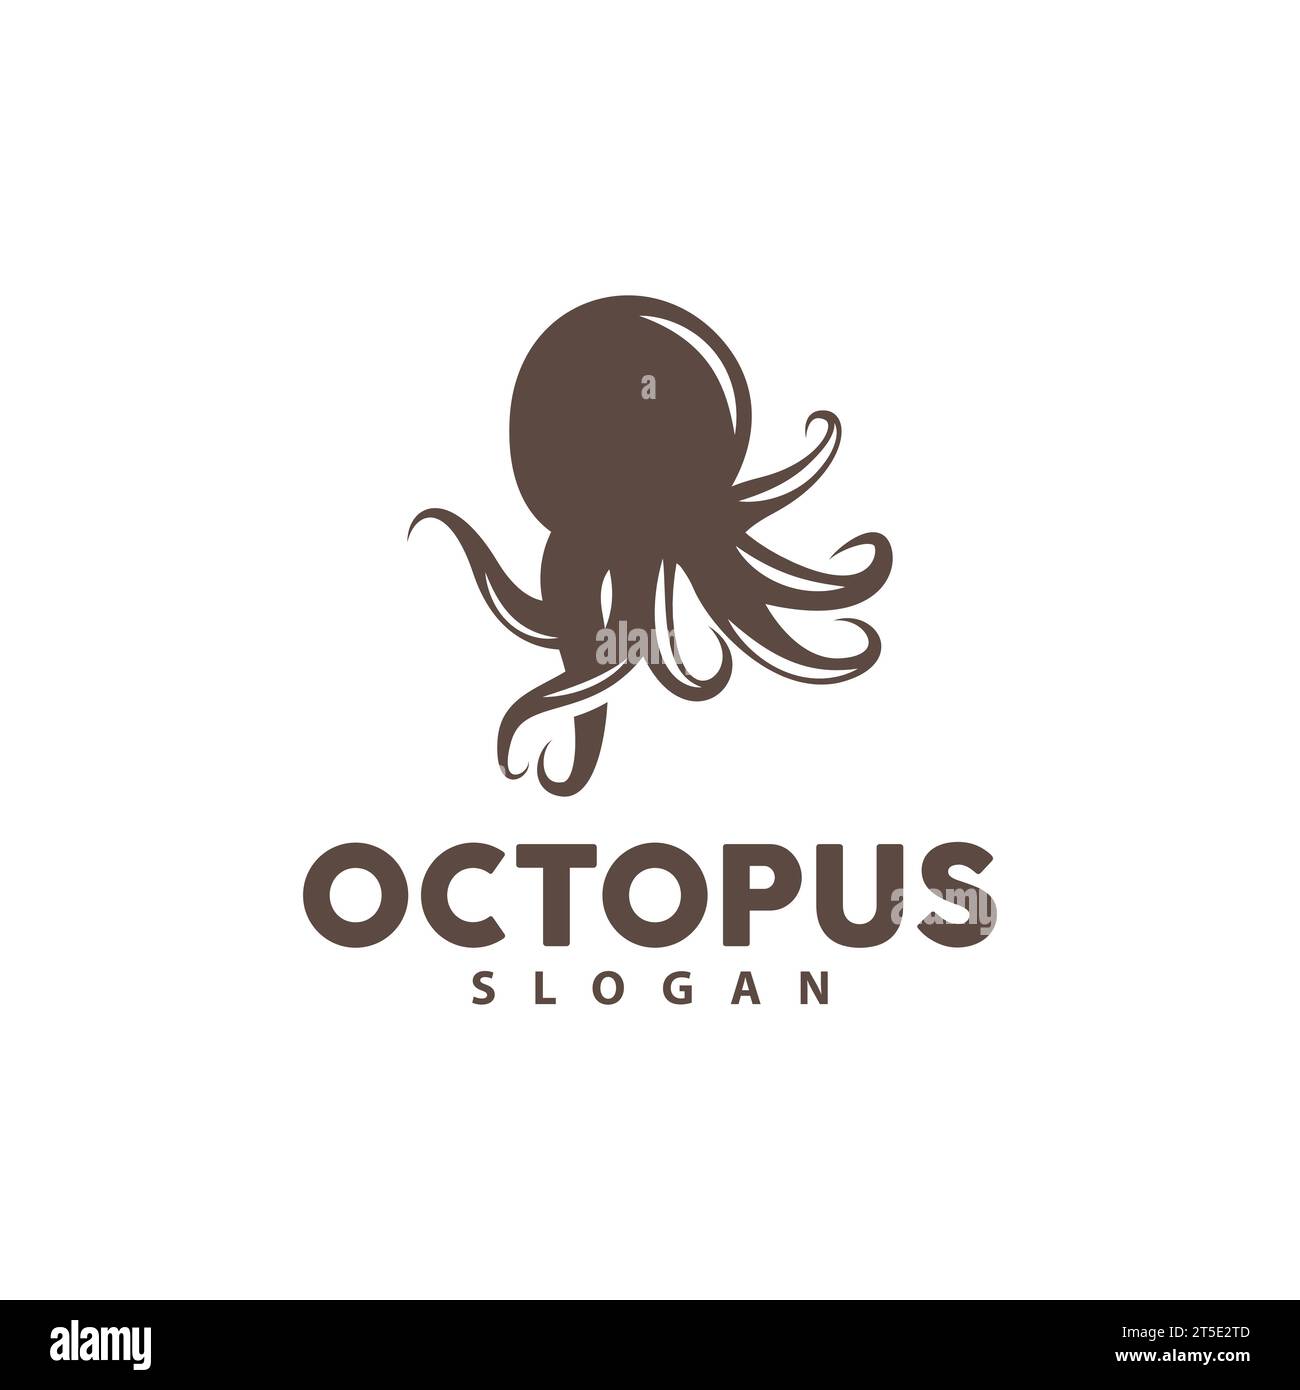 Octopus Logo, Sea Animals Vector, Seafood Ingredients Cuttlefish Tentacles Icon Silhouette Design Stock Vector